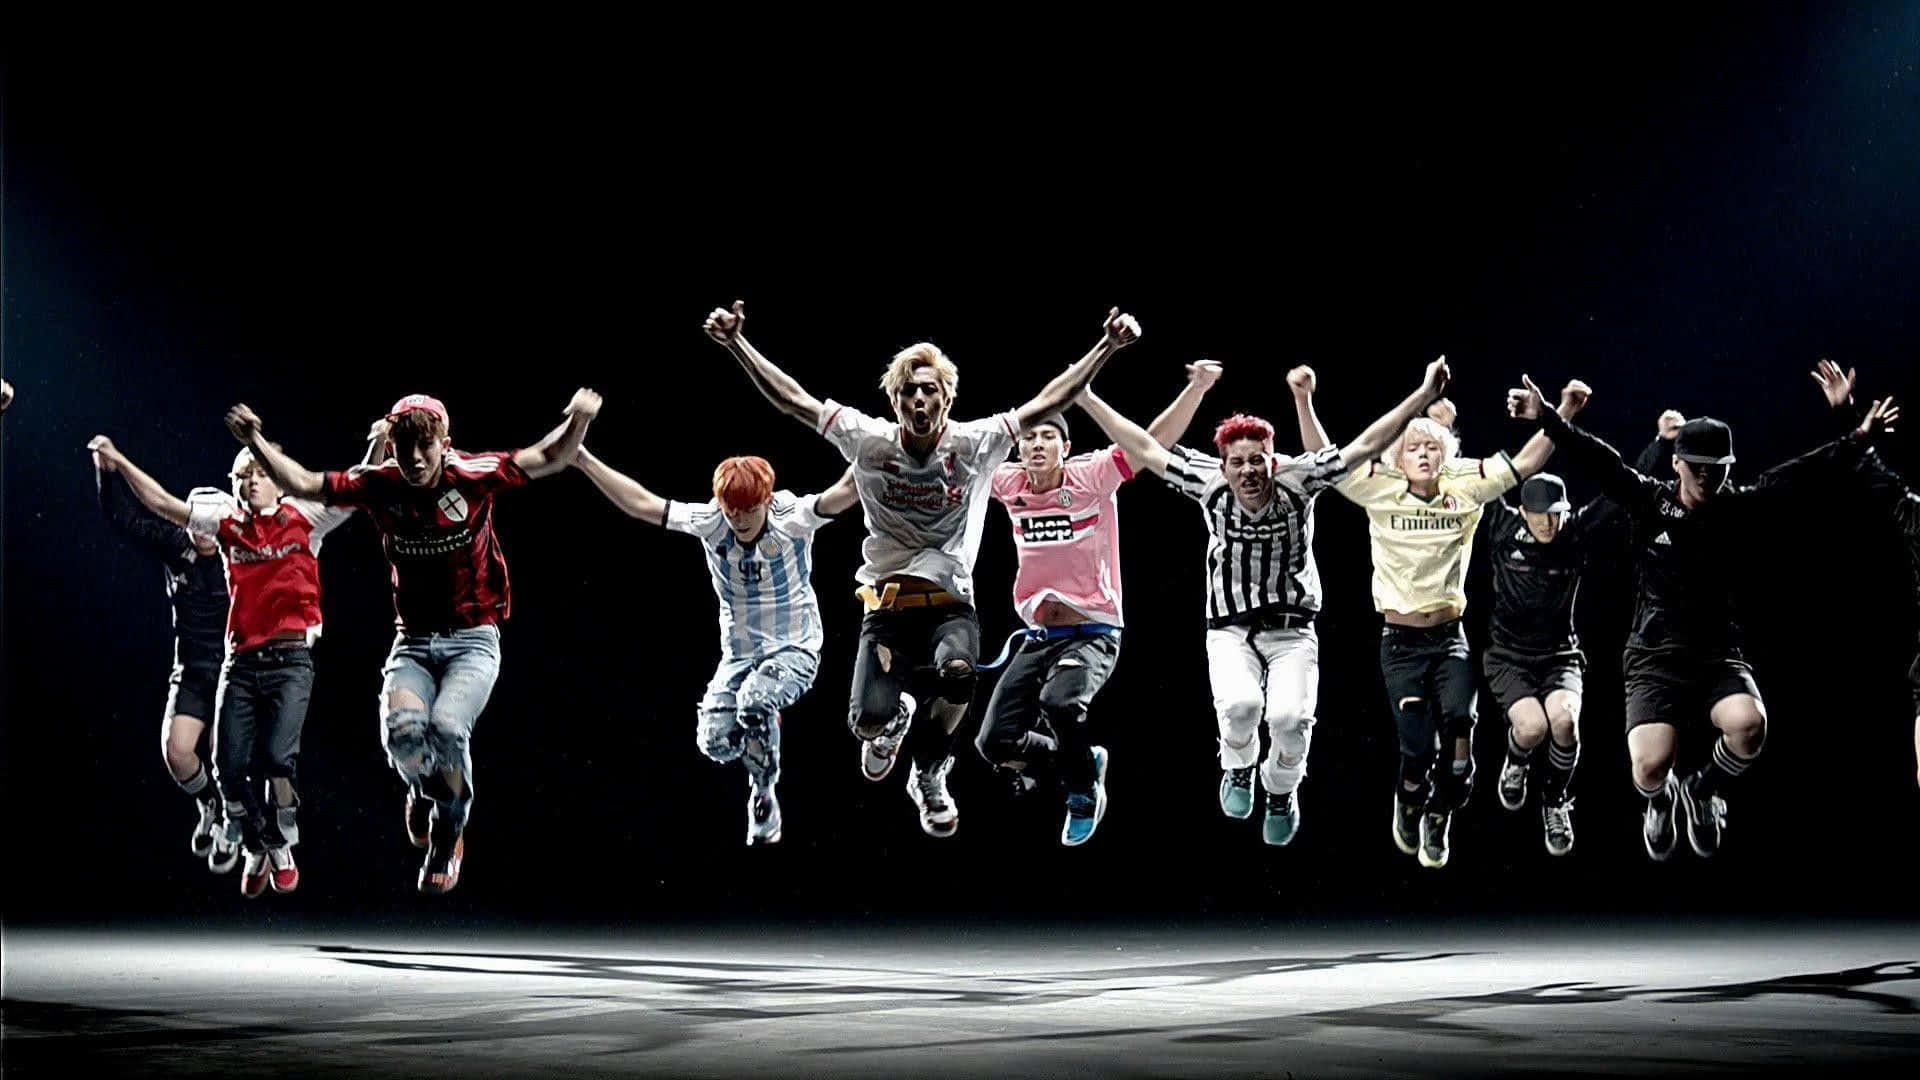 A Group Of People Jumping In The Air